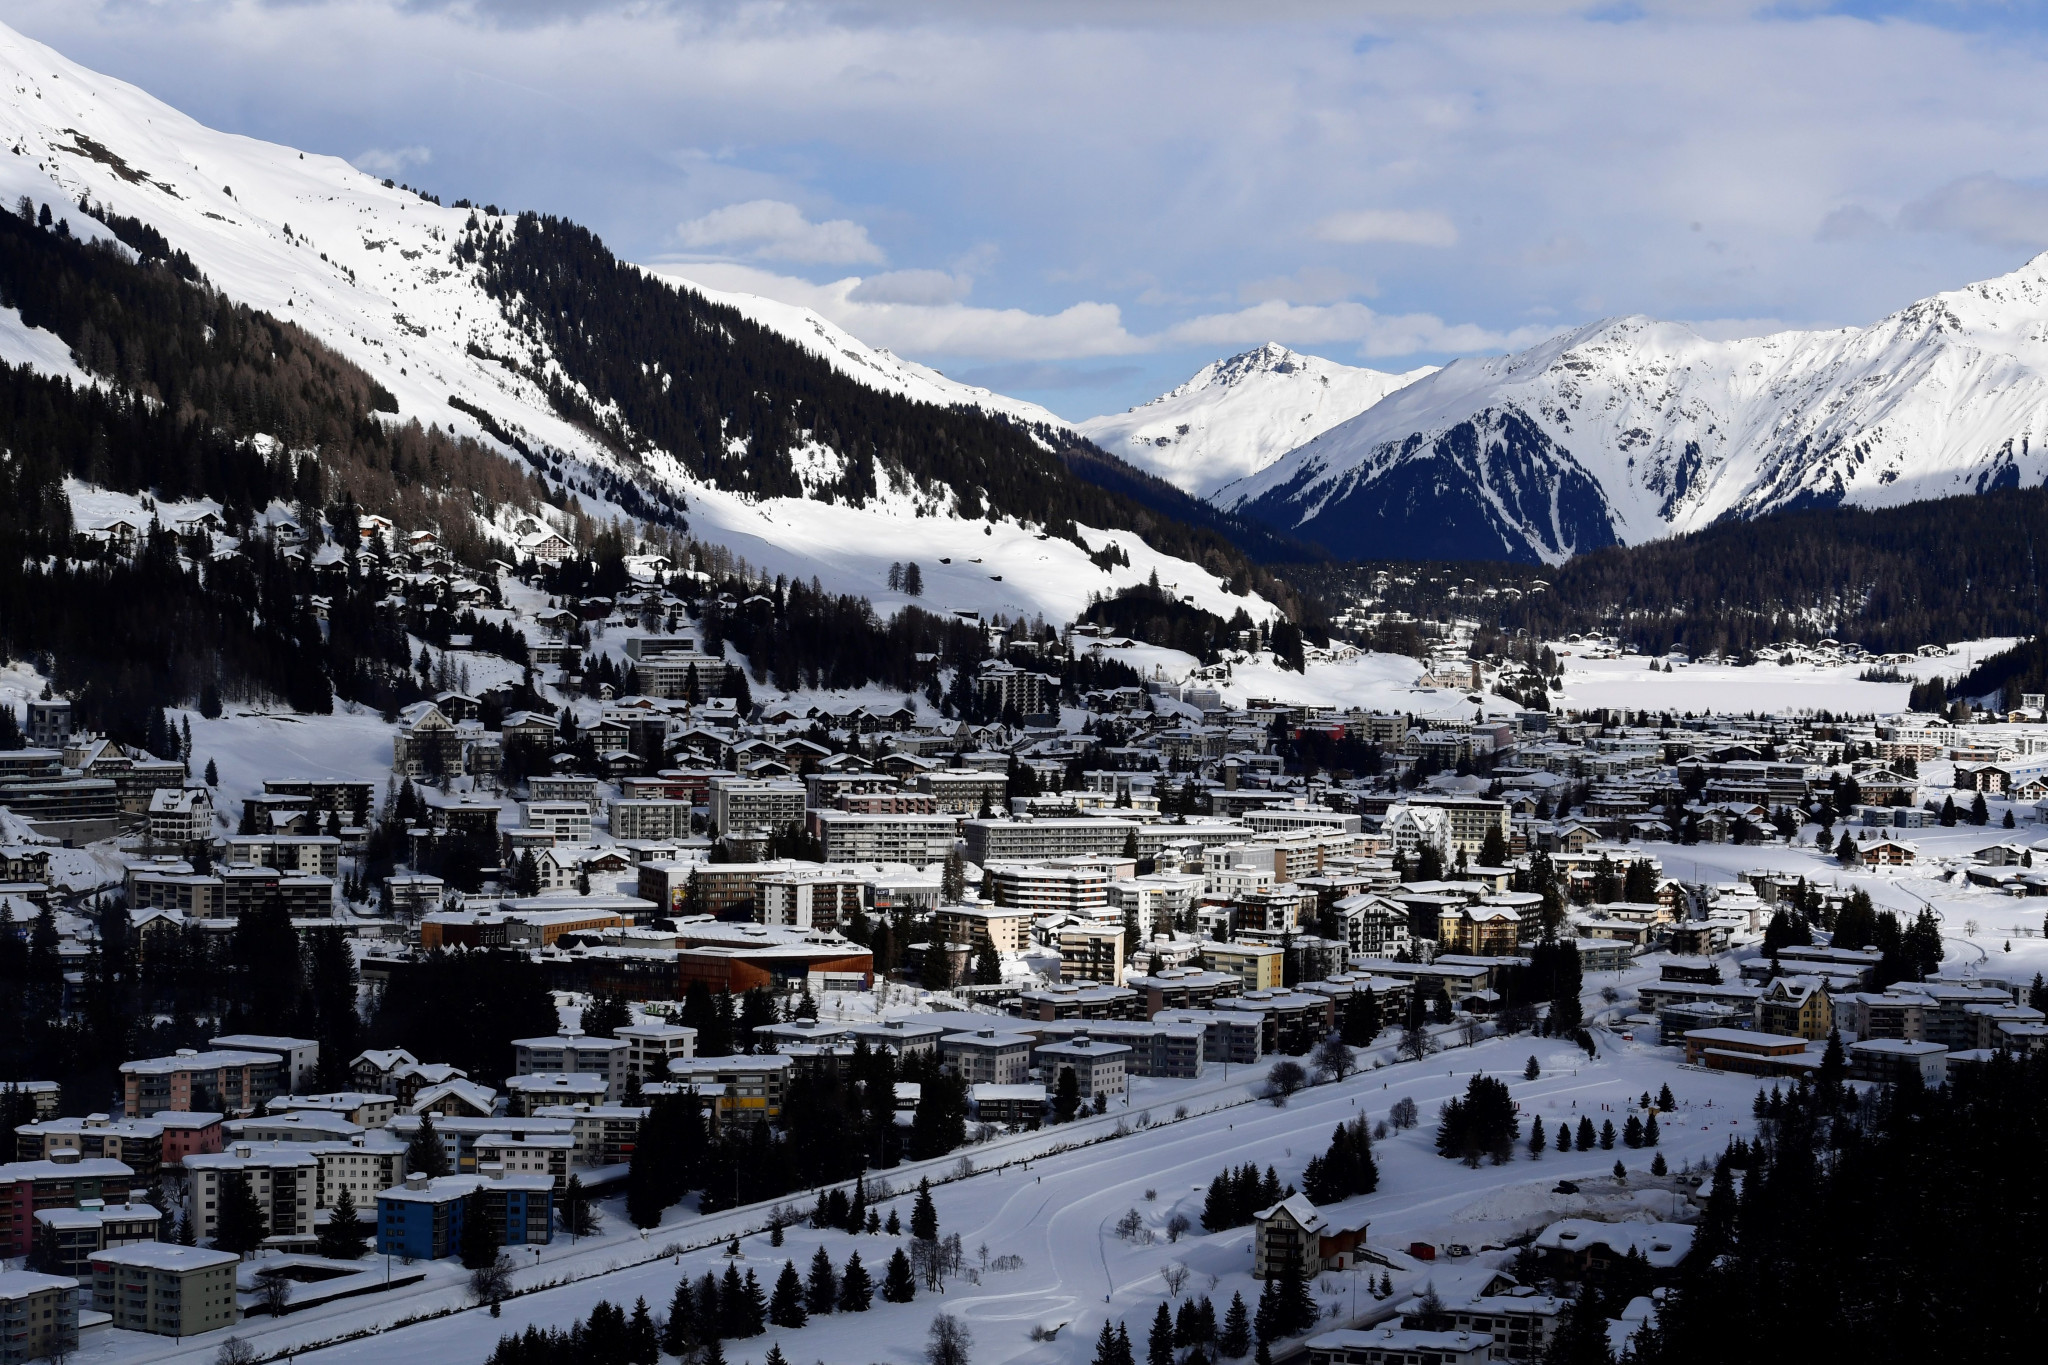 A parallel event in the FIS Alpine Ski World Cup in Davos has been postponed until 2022 ©Getty Images